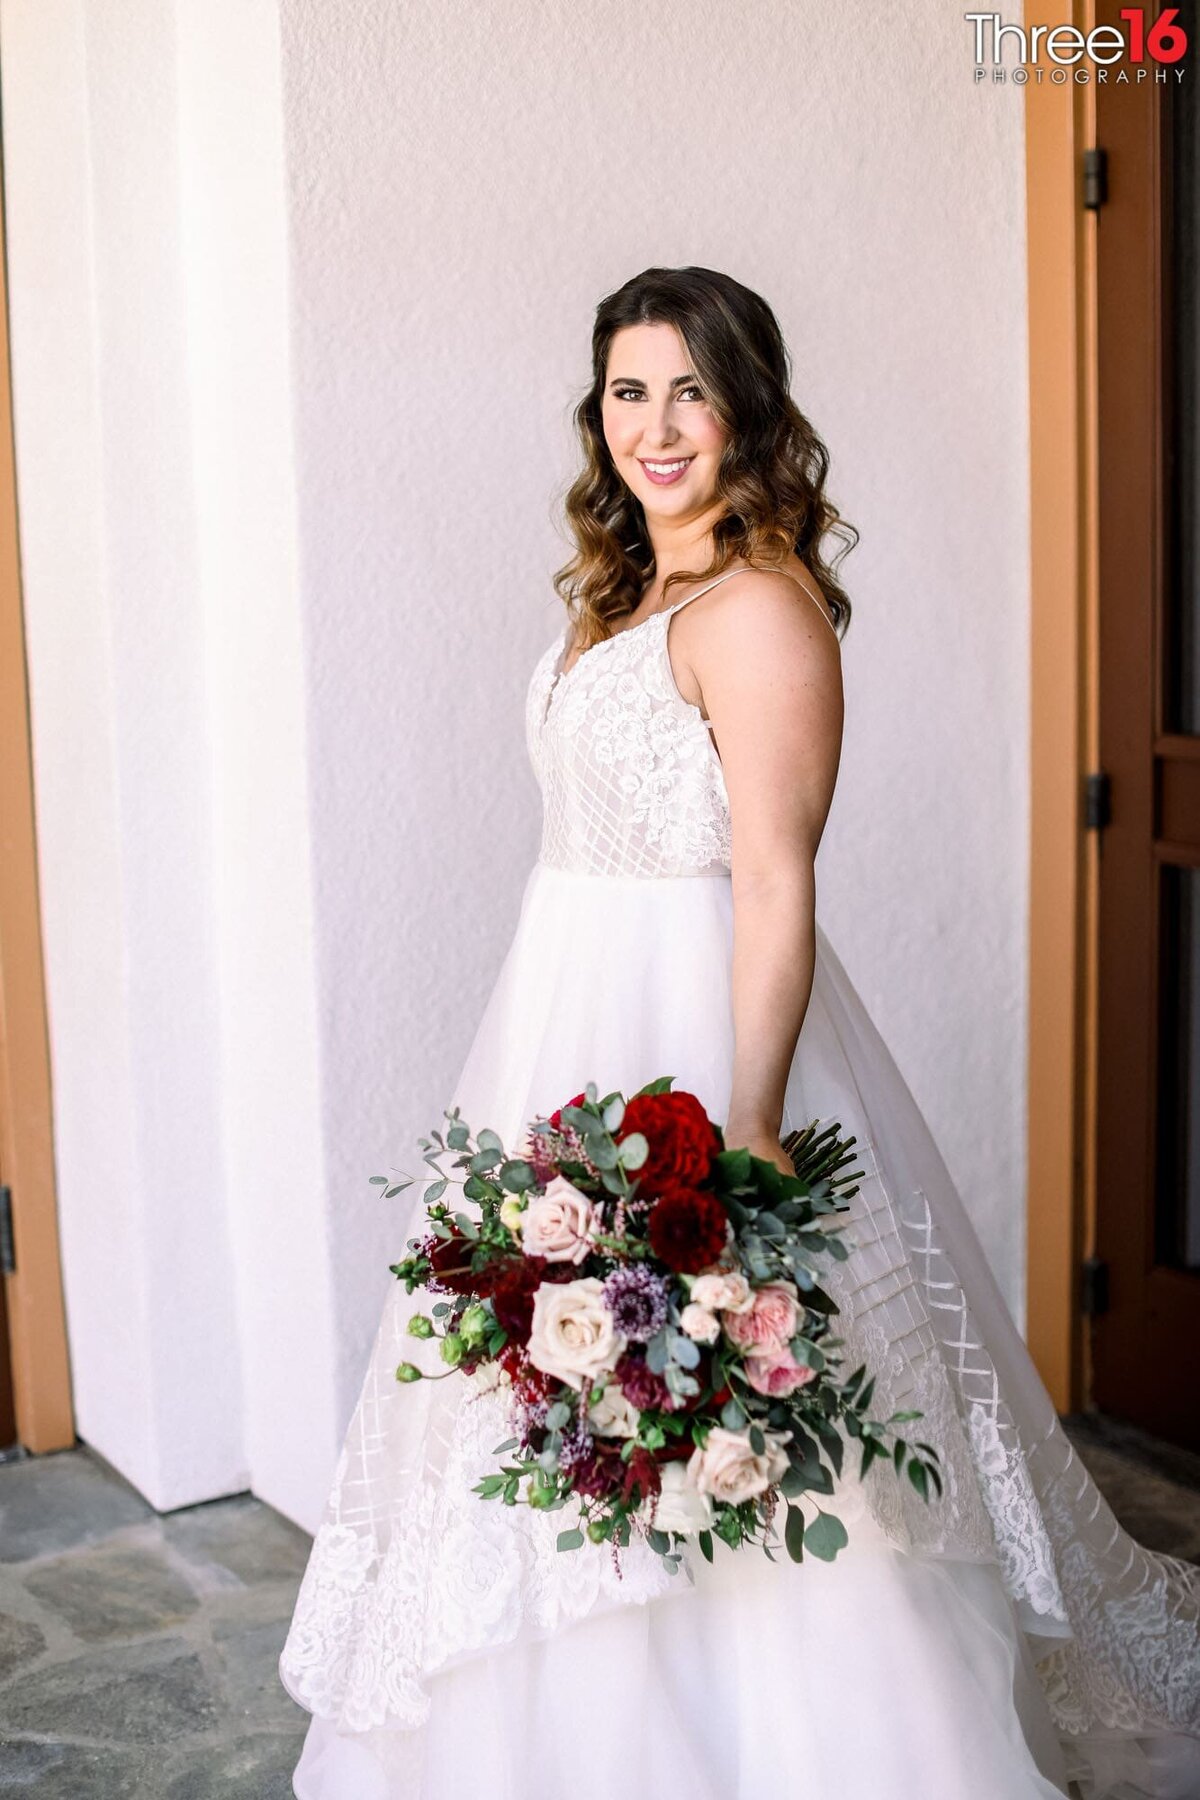 Bride poses with her bouquet